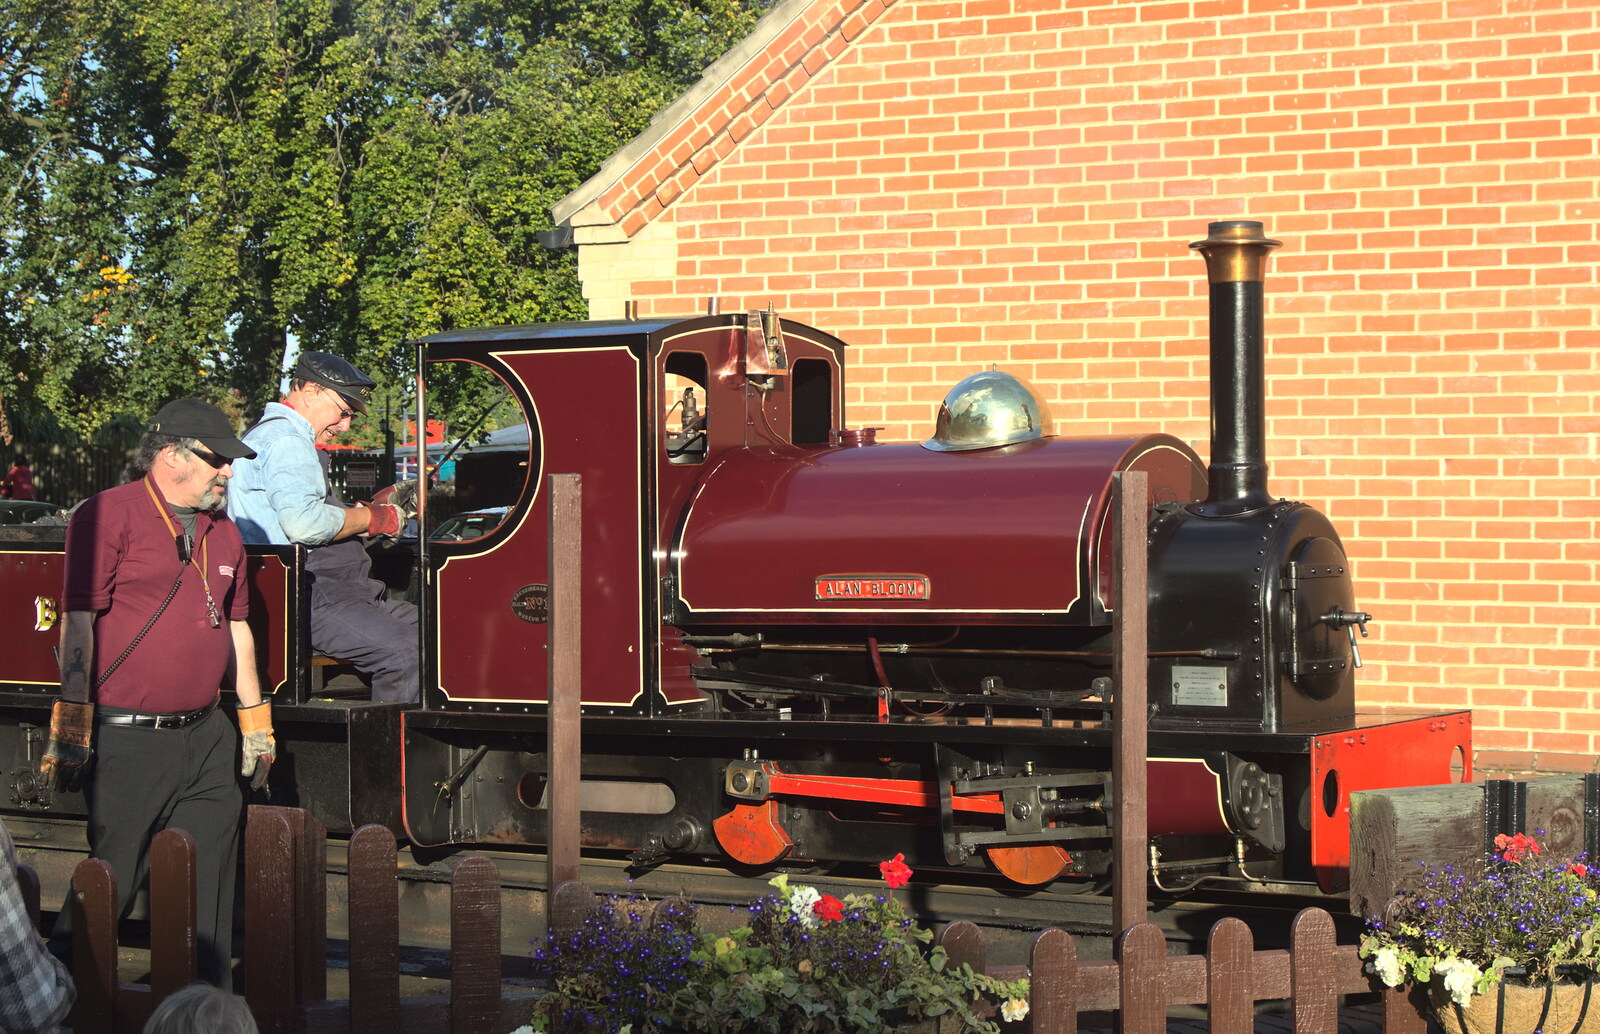 The train is back at the 'station' from Alan Bloom's Gardens, Bressingham, Norfolk - 6th October 2012